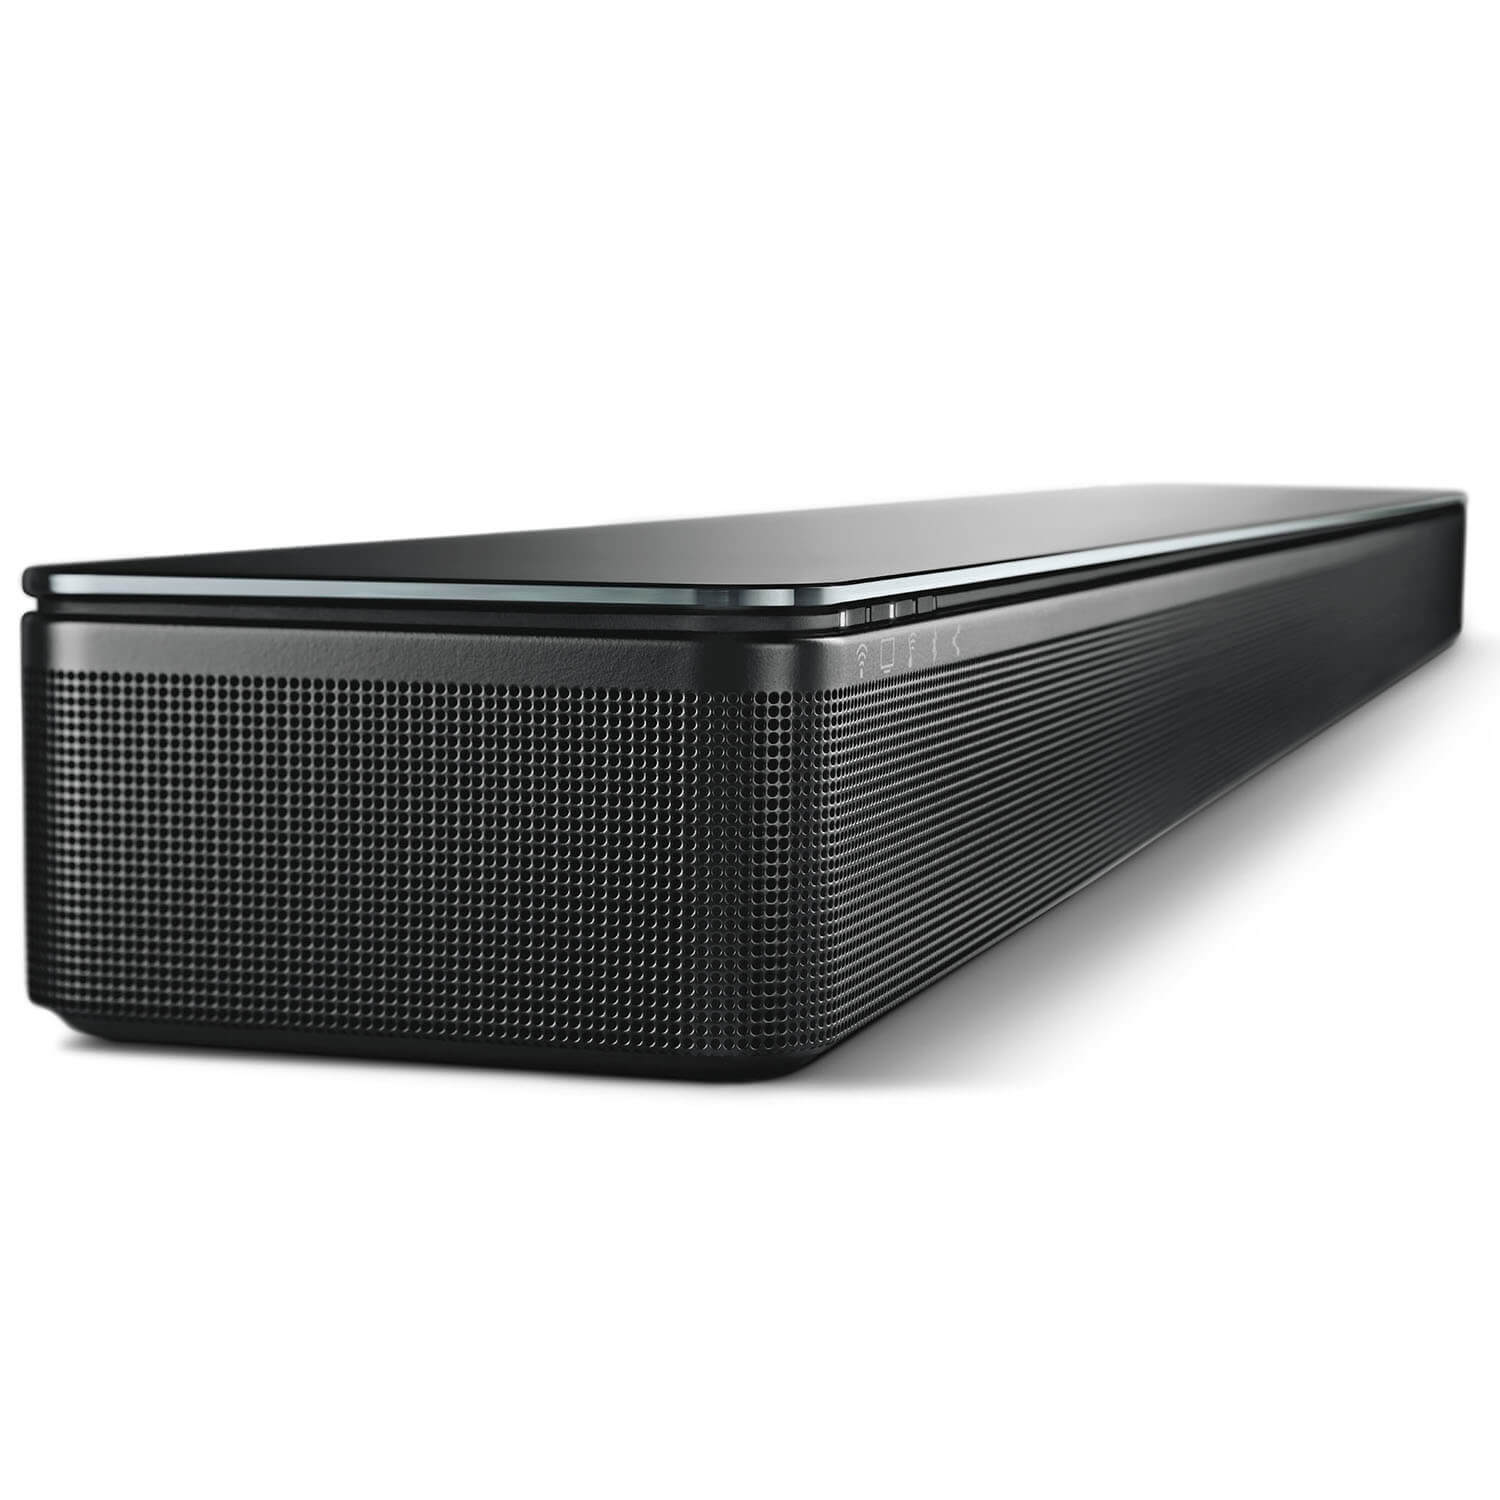 Get A Bose SoundTouch & Experience The Difference! Contact Us Today!